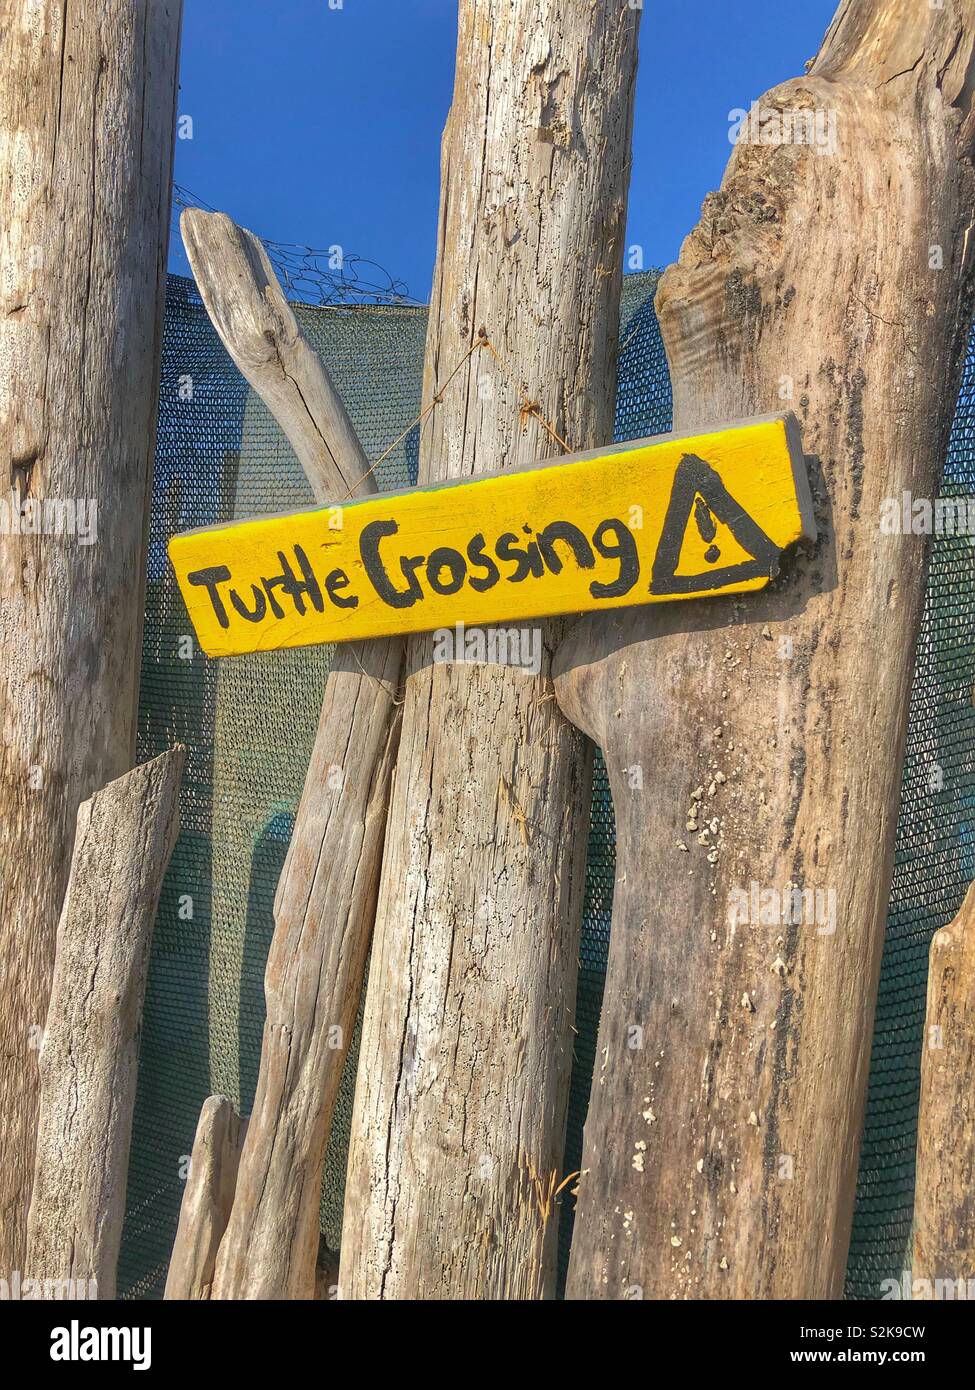 Turtle crossing sign. Banque D'Images